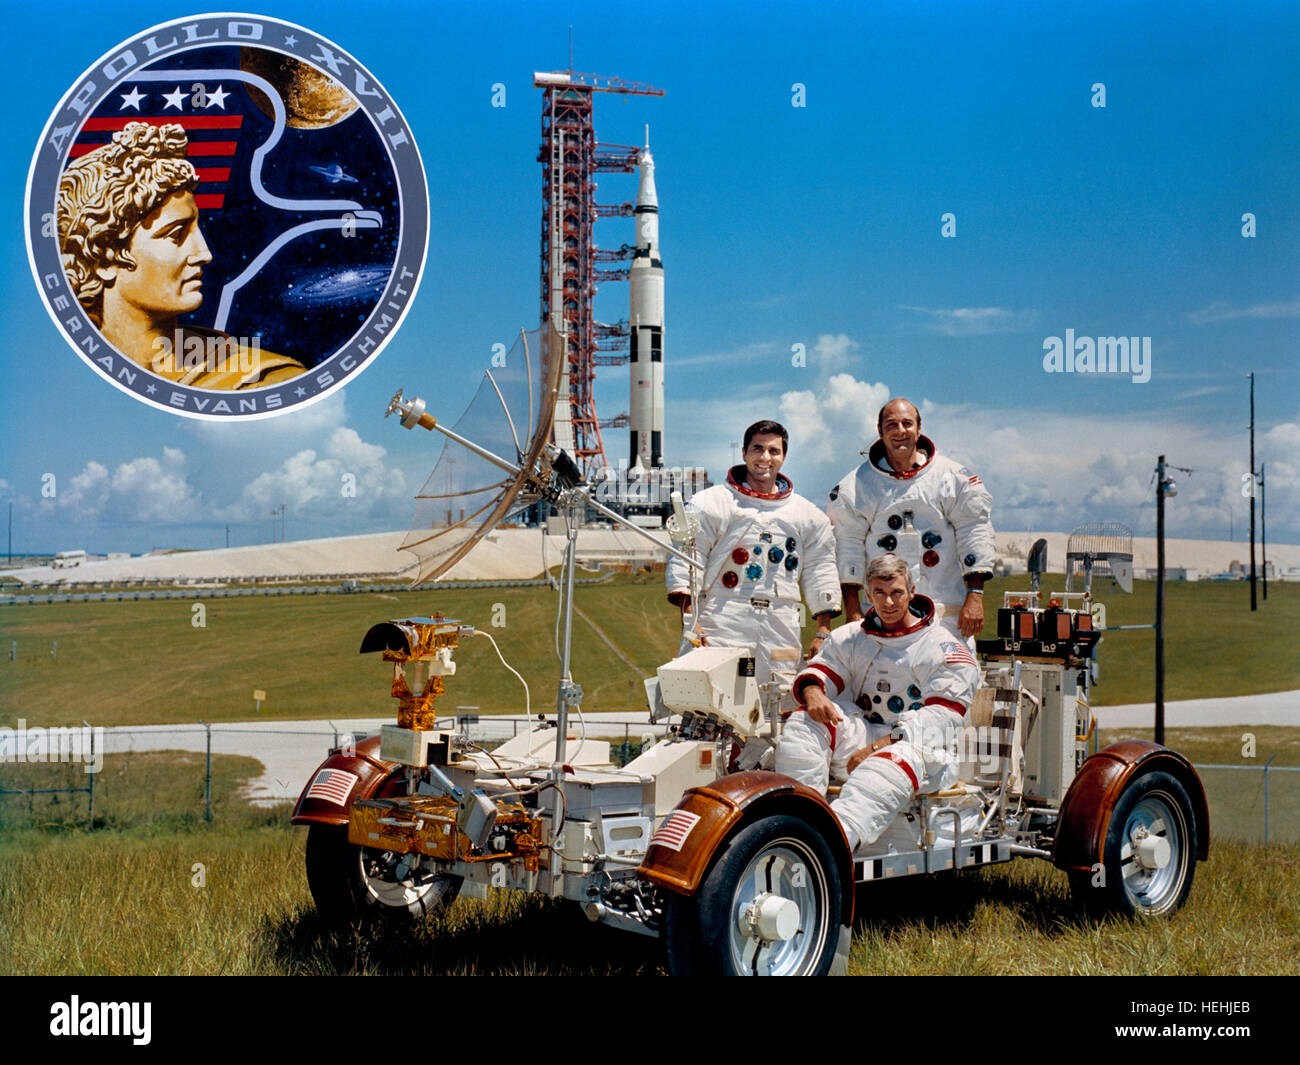 NASA Apollo 17 lunar landing mission prime crew astronauts (L-R) Harrison Schmitt, Gene Cernan, and Ronald Evans practice operating a Lunar Roving Vehicle trainer with the Apollo 17 Saturn V spacecraft in the background at the Kennedy Space Center September 30, 1971 near Merritt Island, Florida. Stock Photo